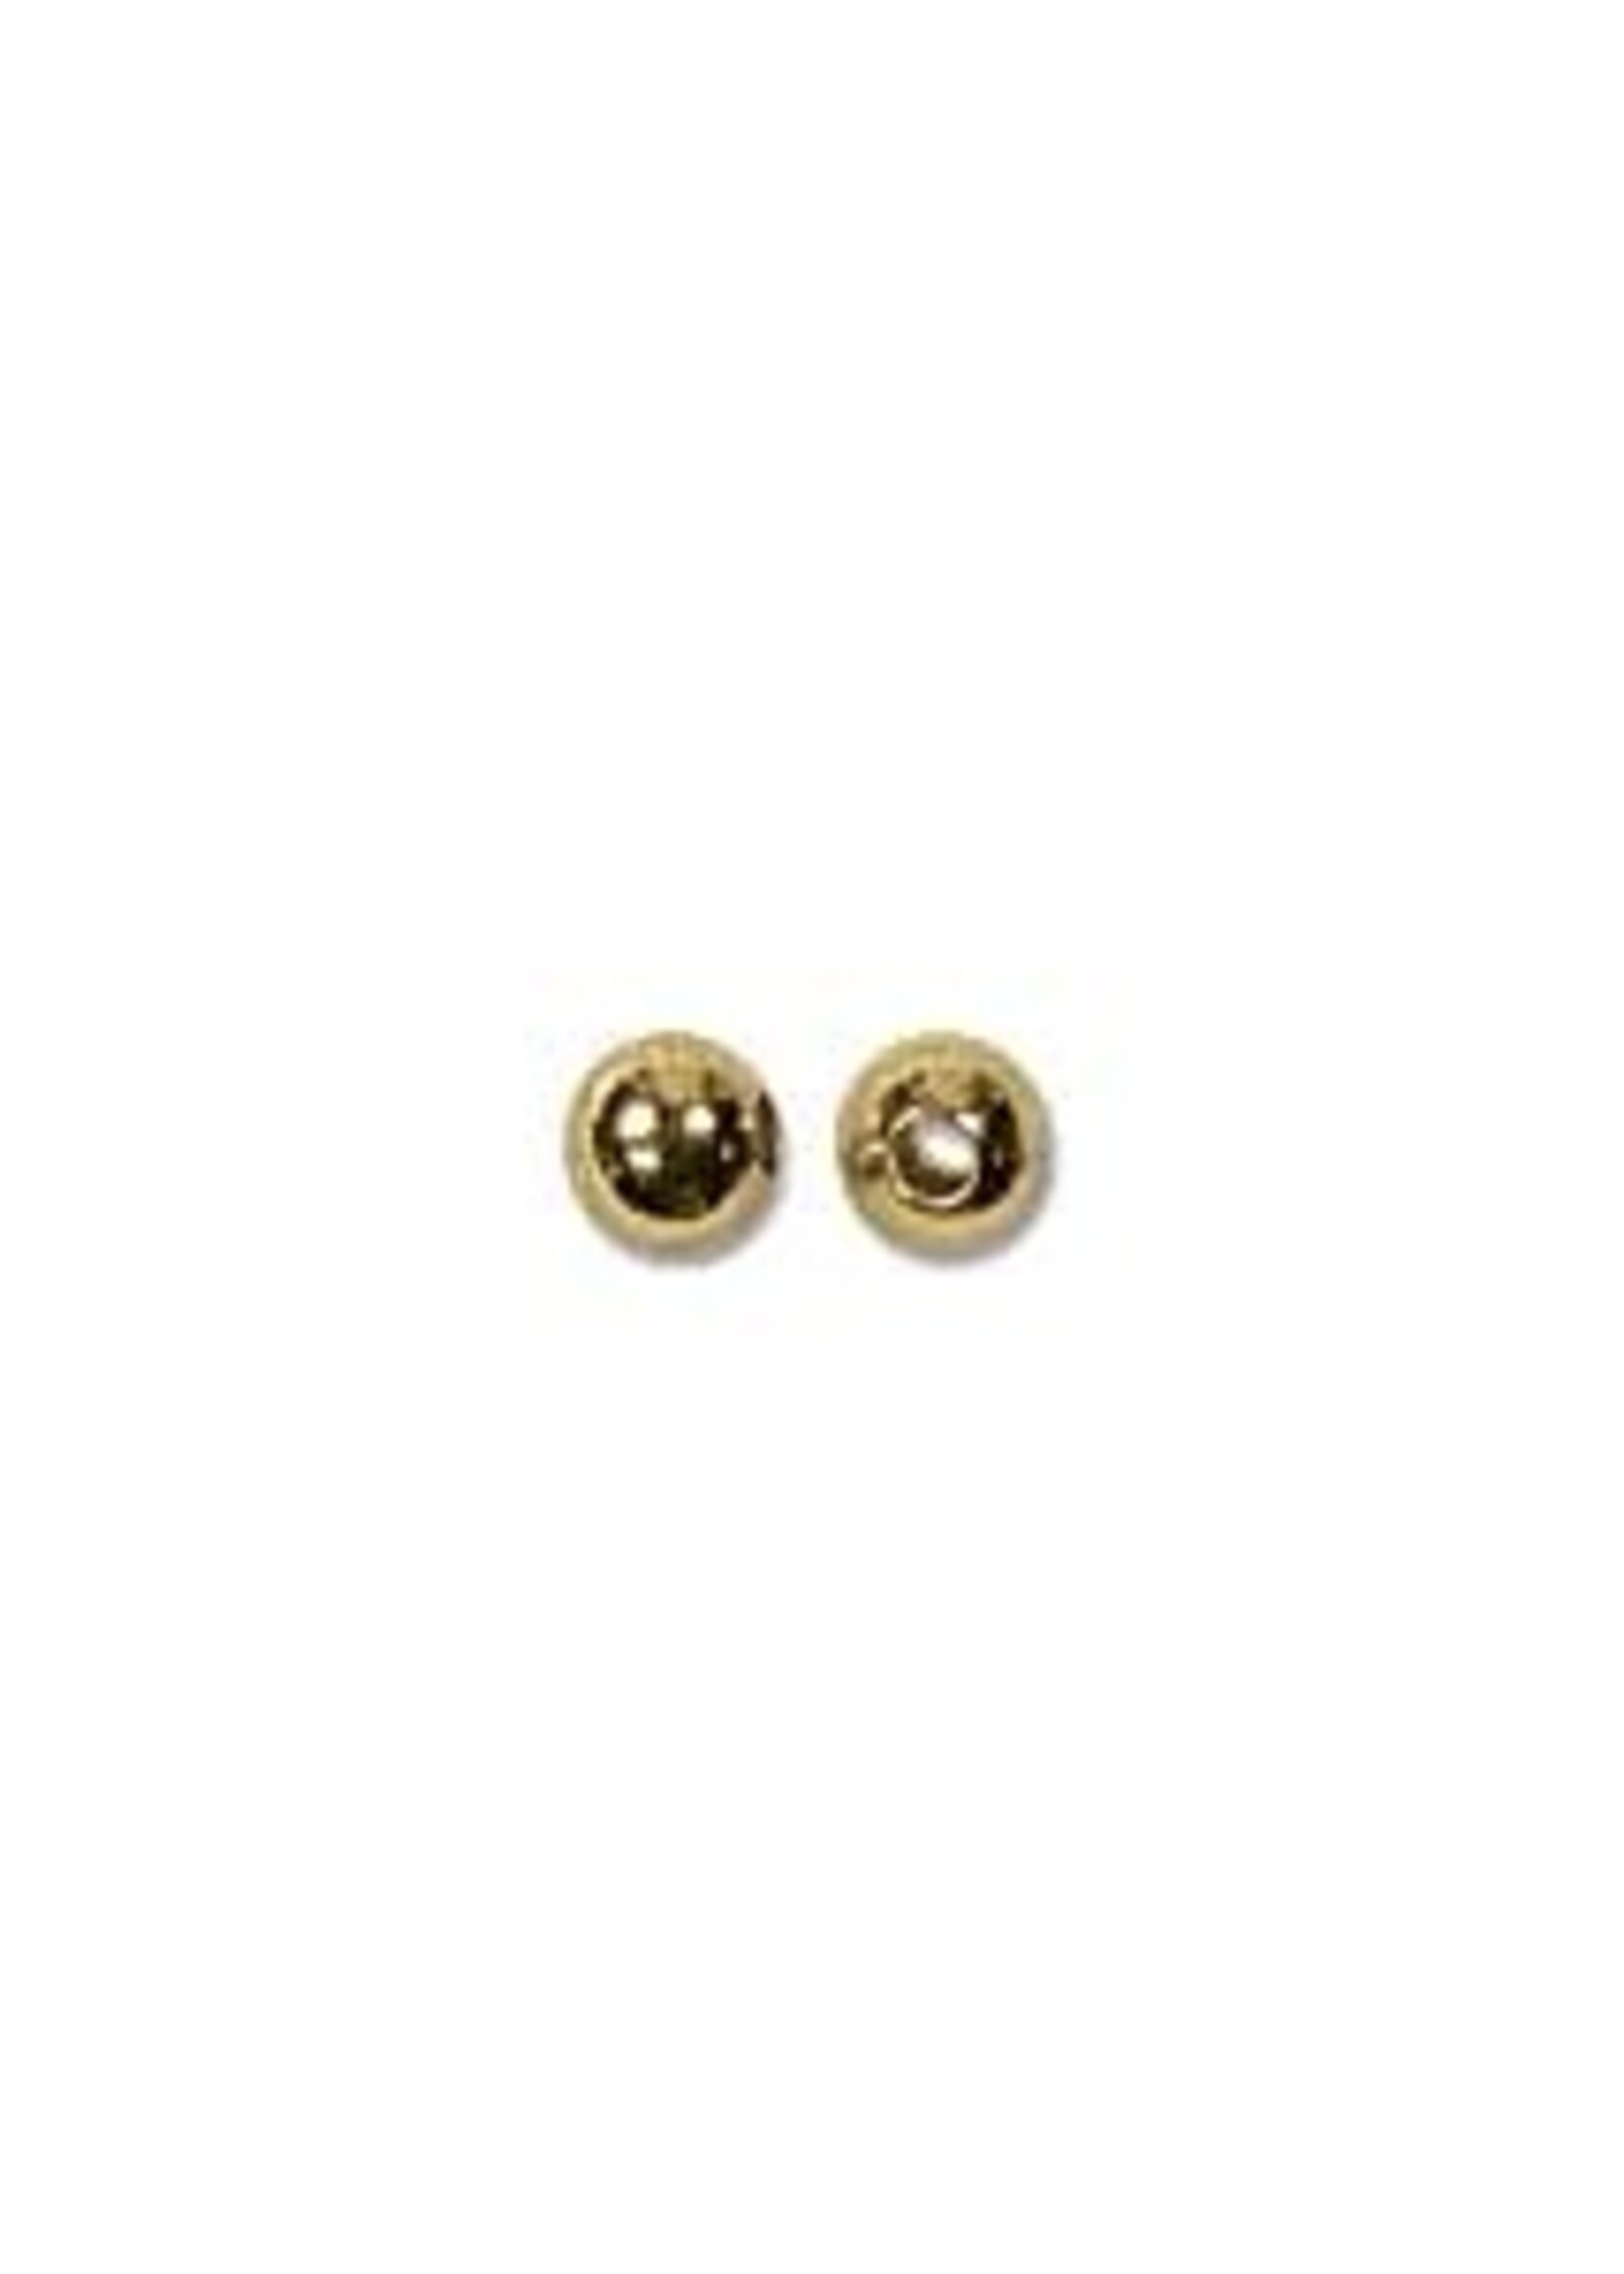 2.4mm Round Bead Gold Plated qty 144